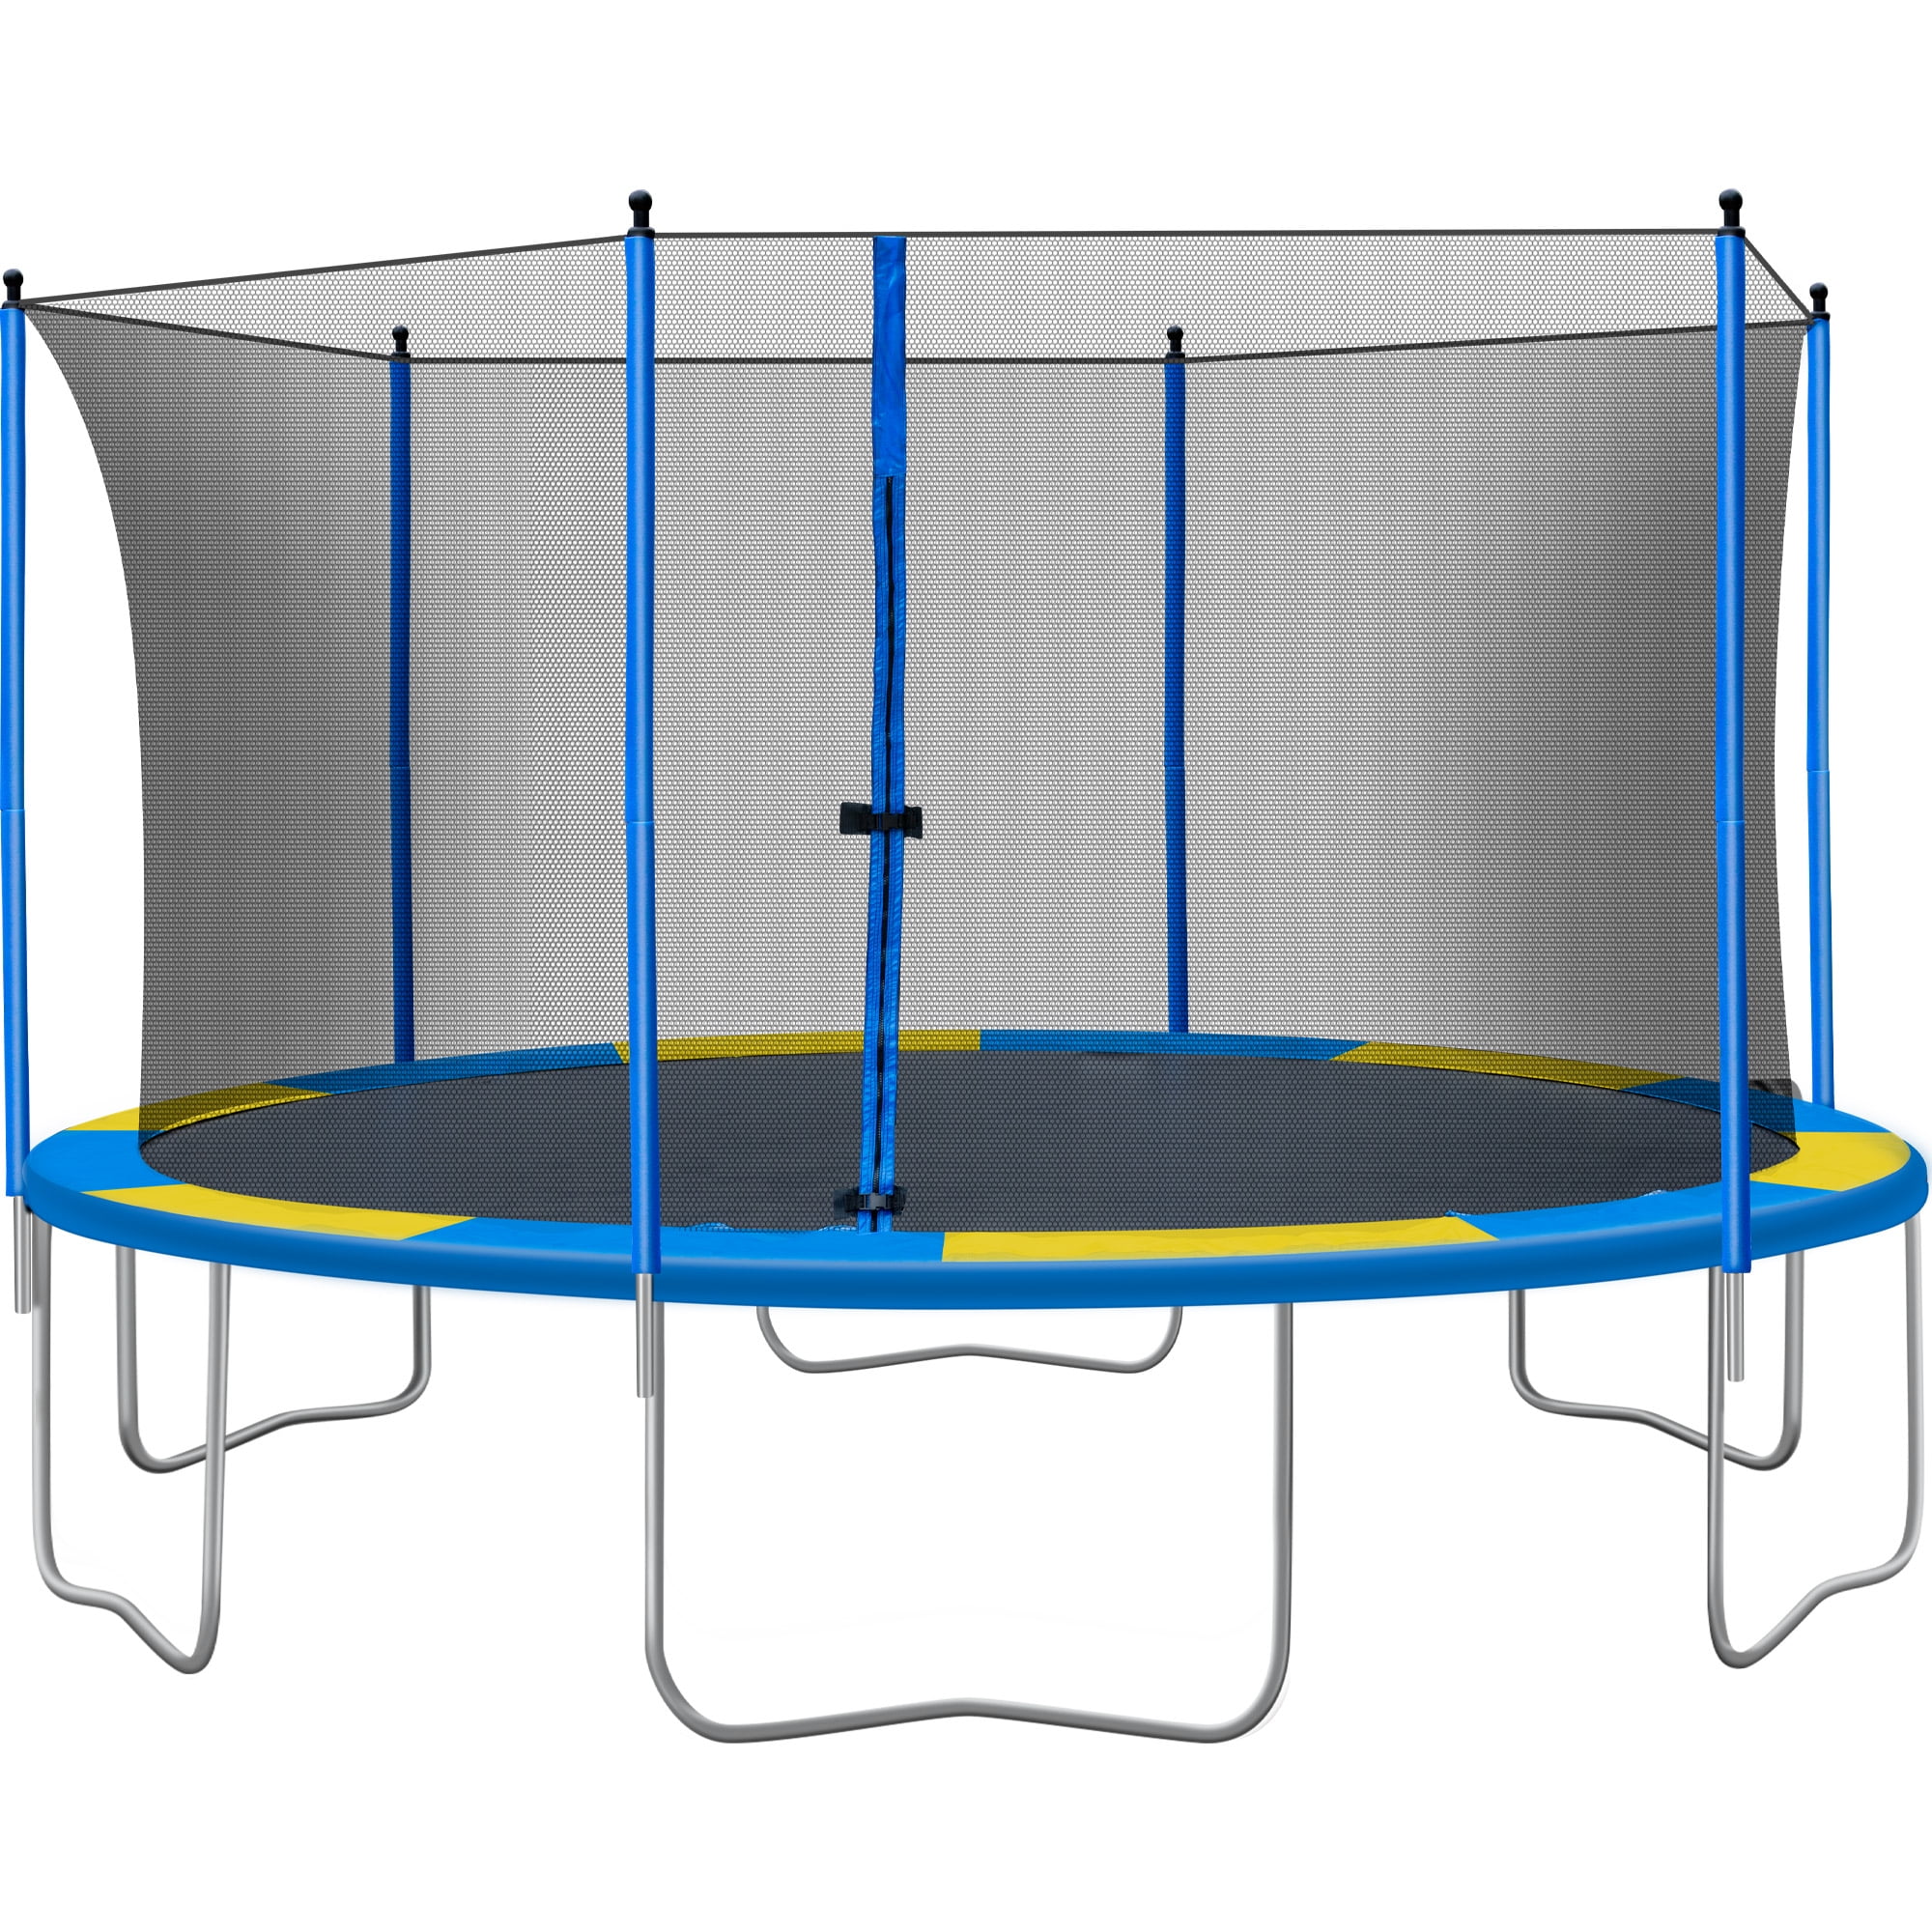 Euroco 14 Ft. Trampoline with Spring Cover Pad and Enclosure